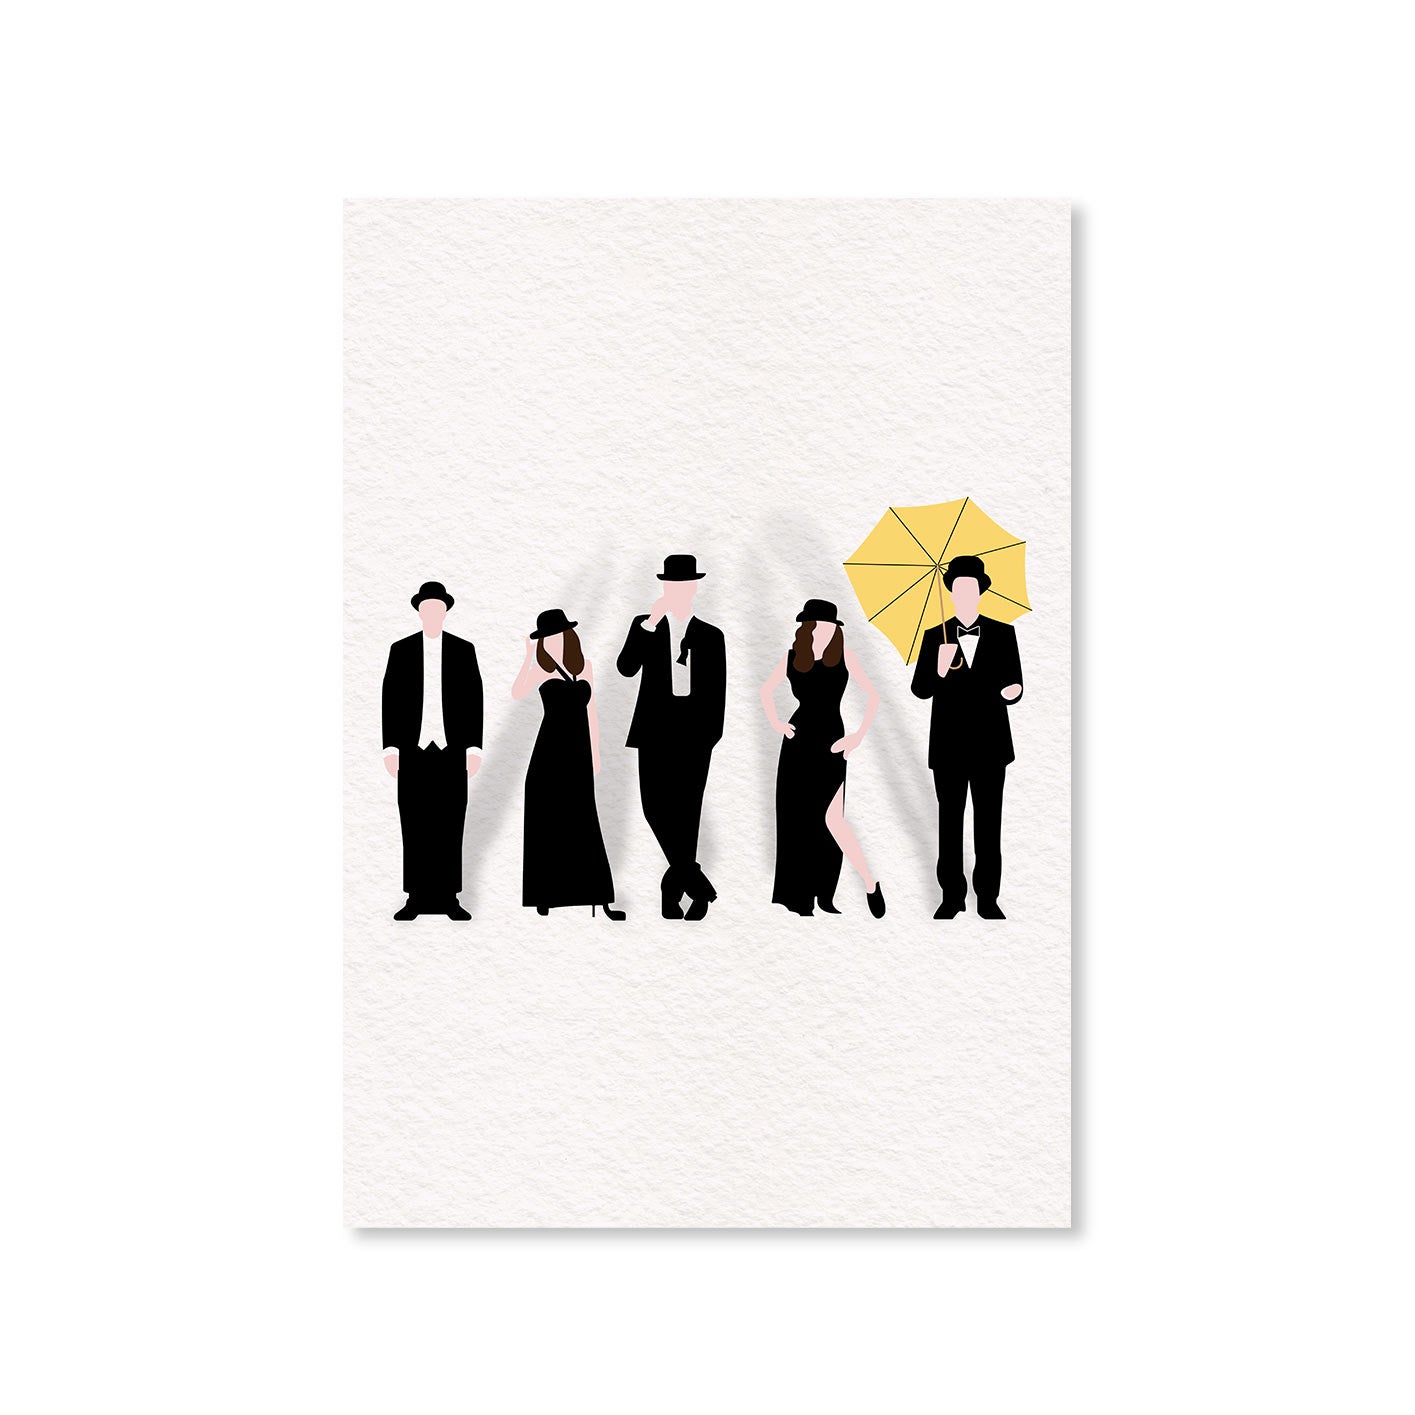 How I Met Your Mother Poster - The Banyan Tee TBT